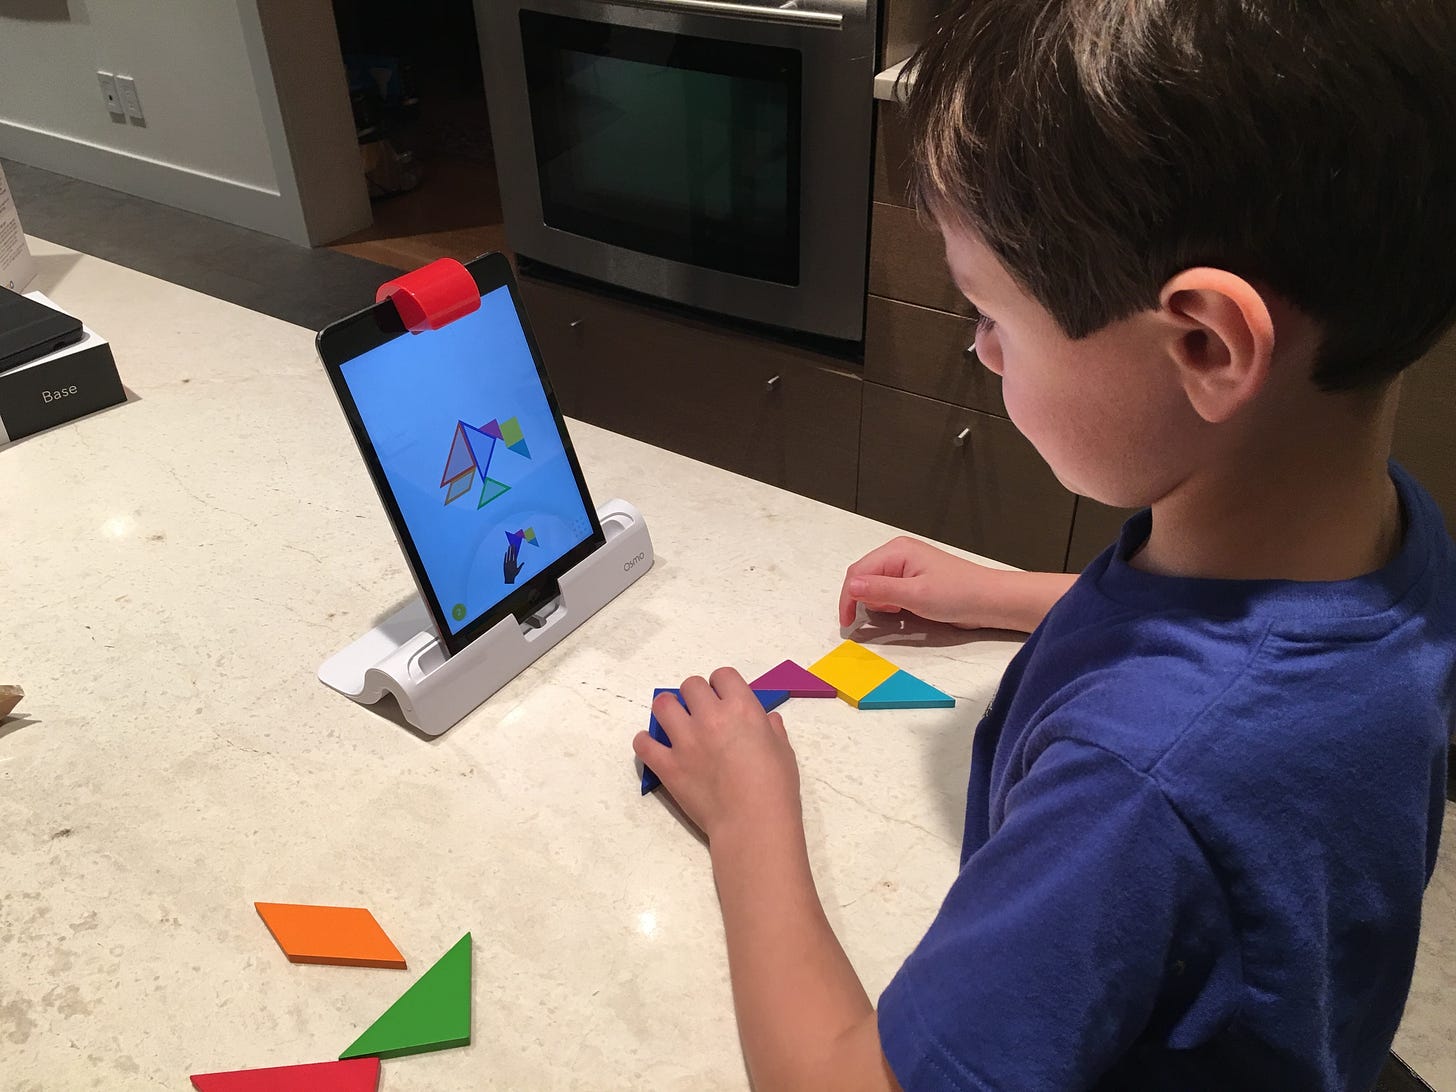 Our 5 year old playing tangram